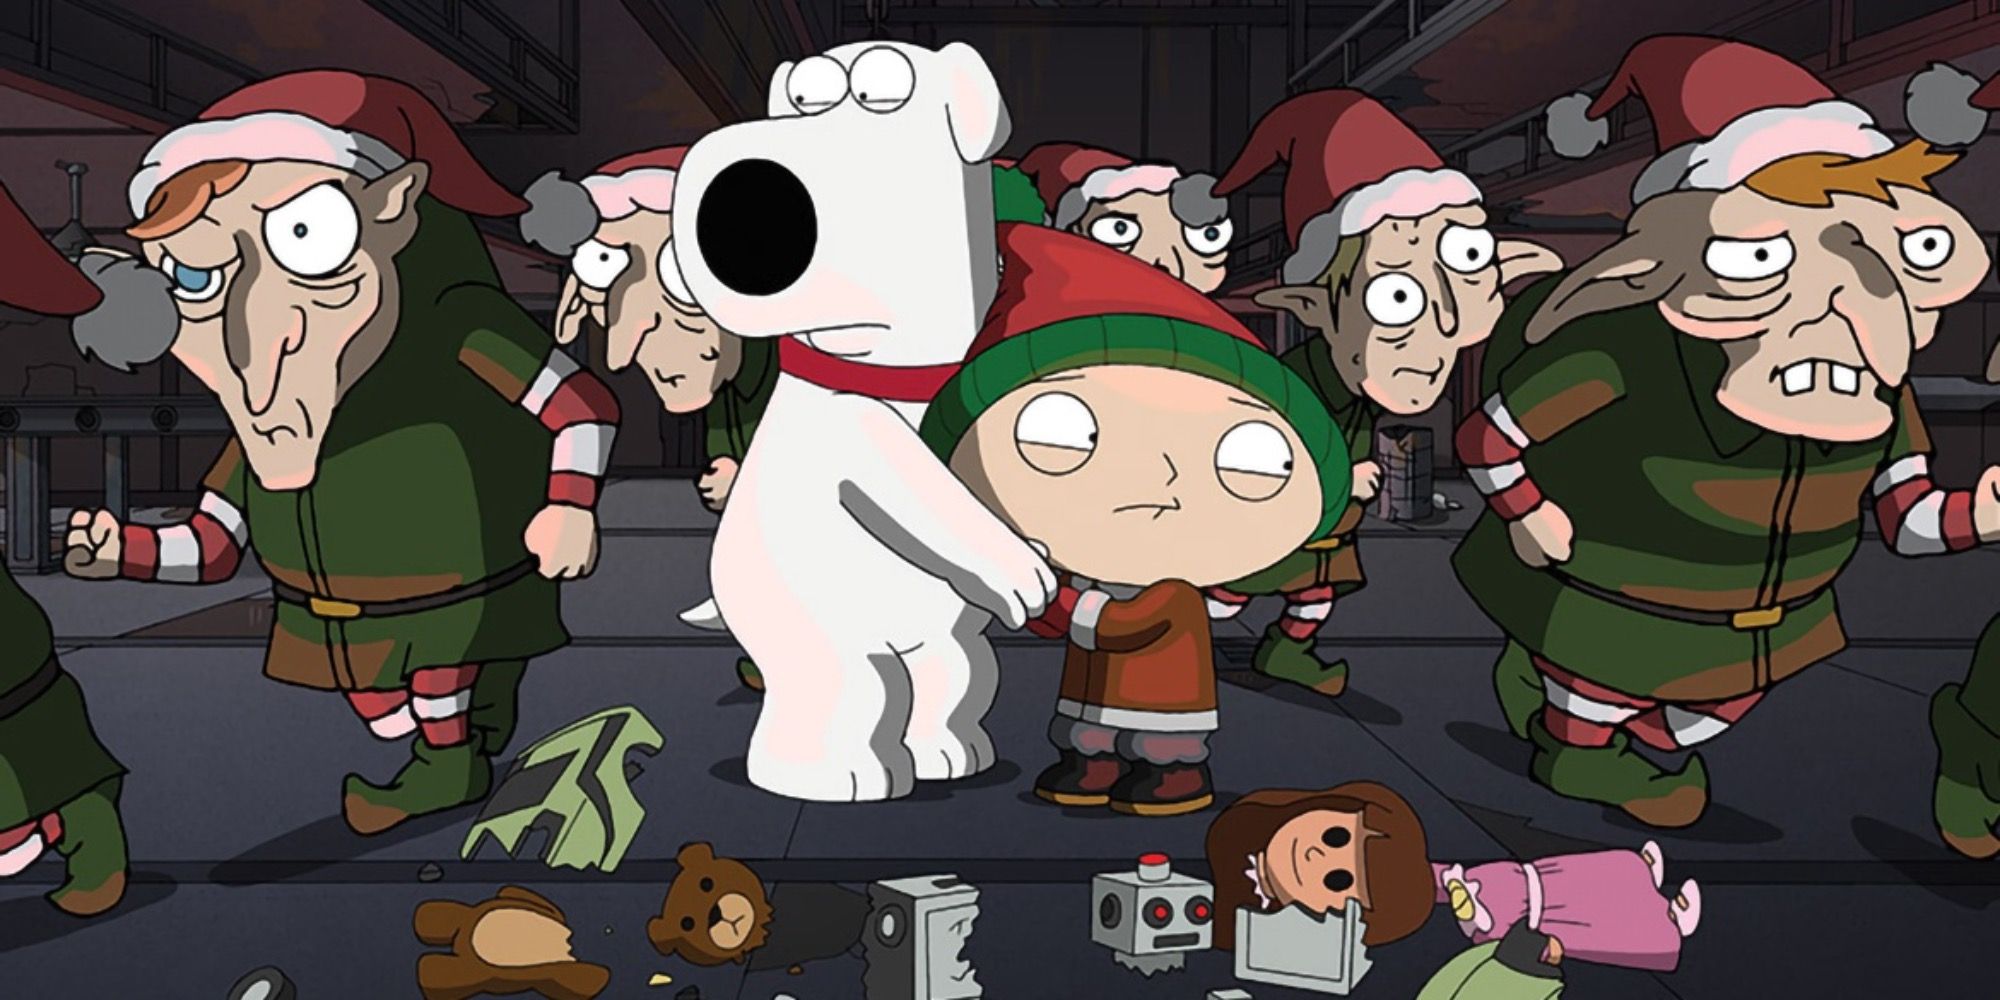 Brian and Stewie huddle together as deformed elves run past